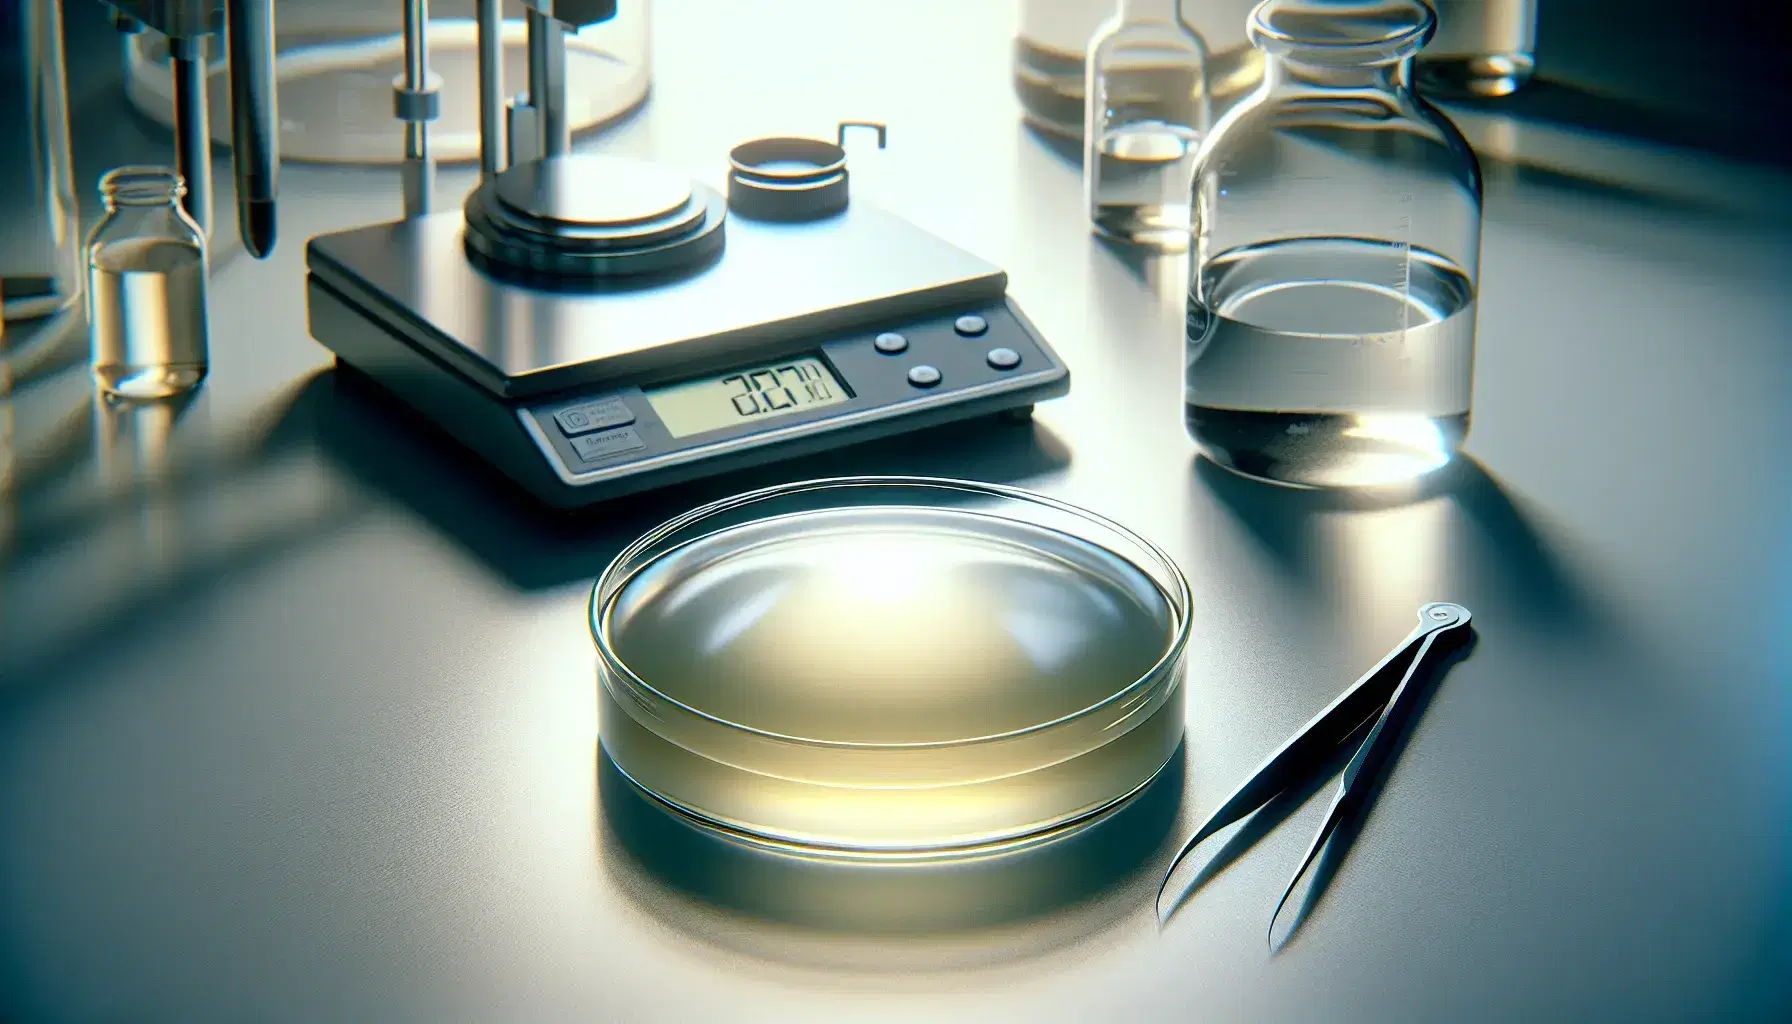 Laboratory with petri dish containing pale yellow wax, steel tweezers, digital scale and beaker with clear liquid on workbench.